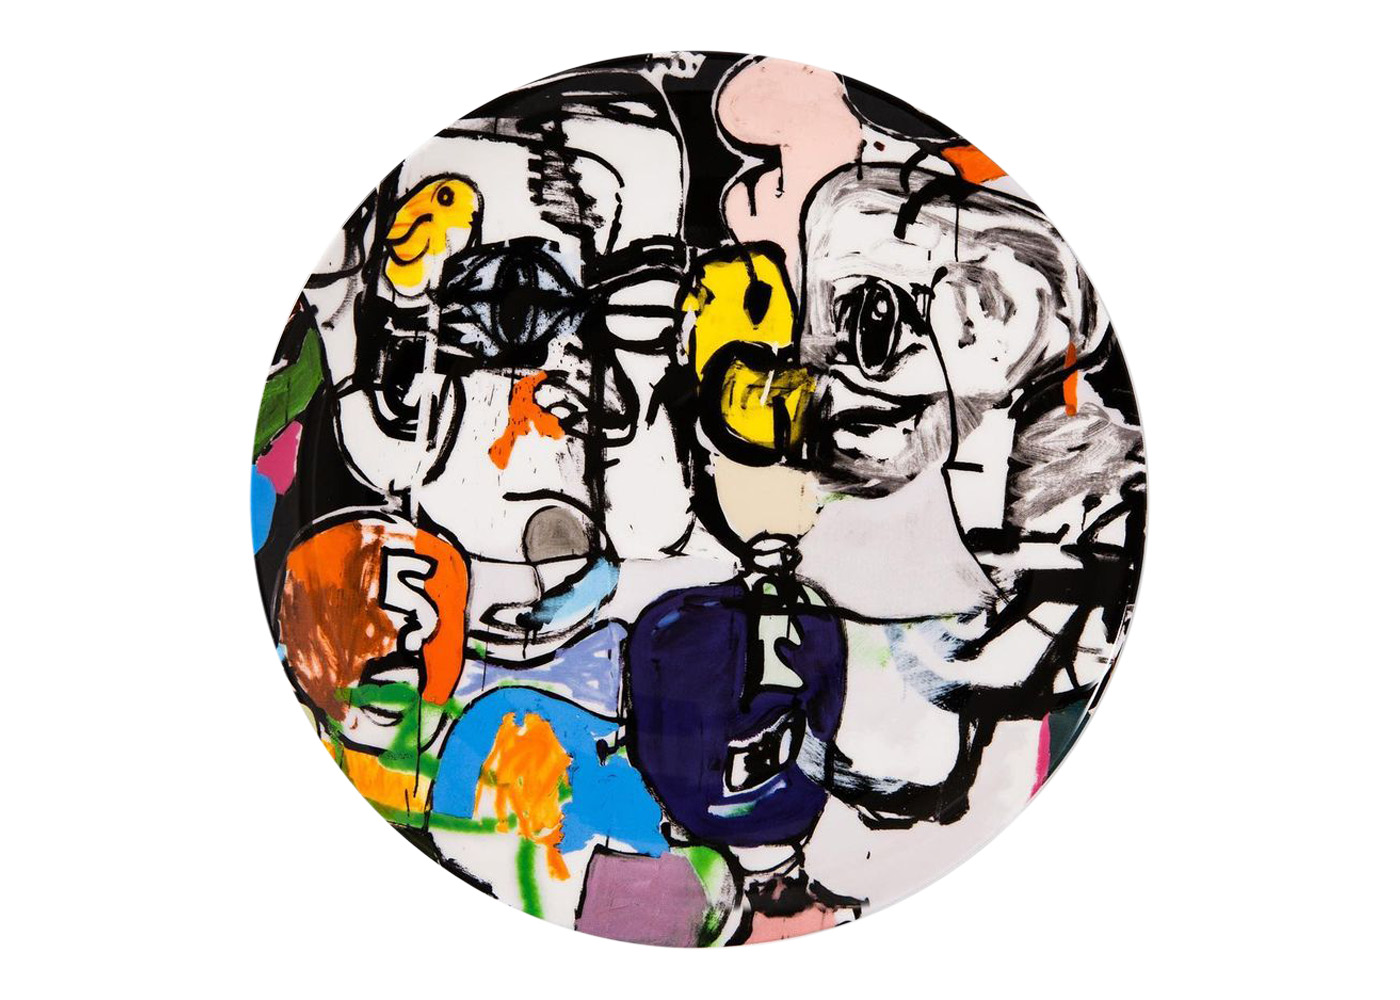 Artist Plate Project x KAWS URGE Plate (Edition of 250) - FW21 - US